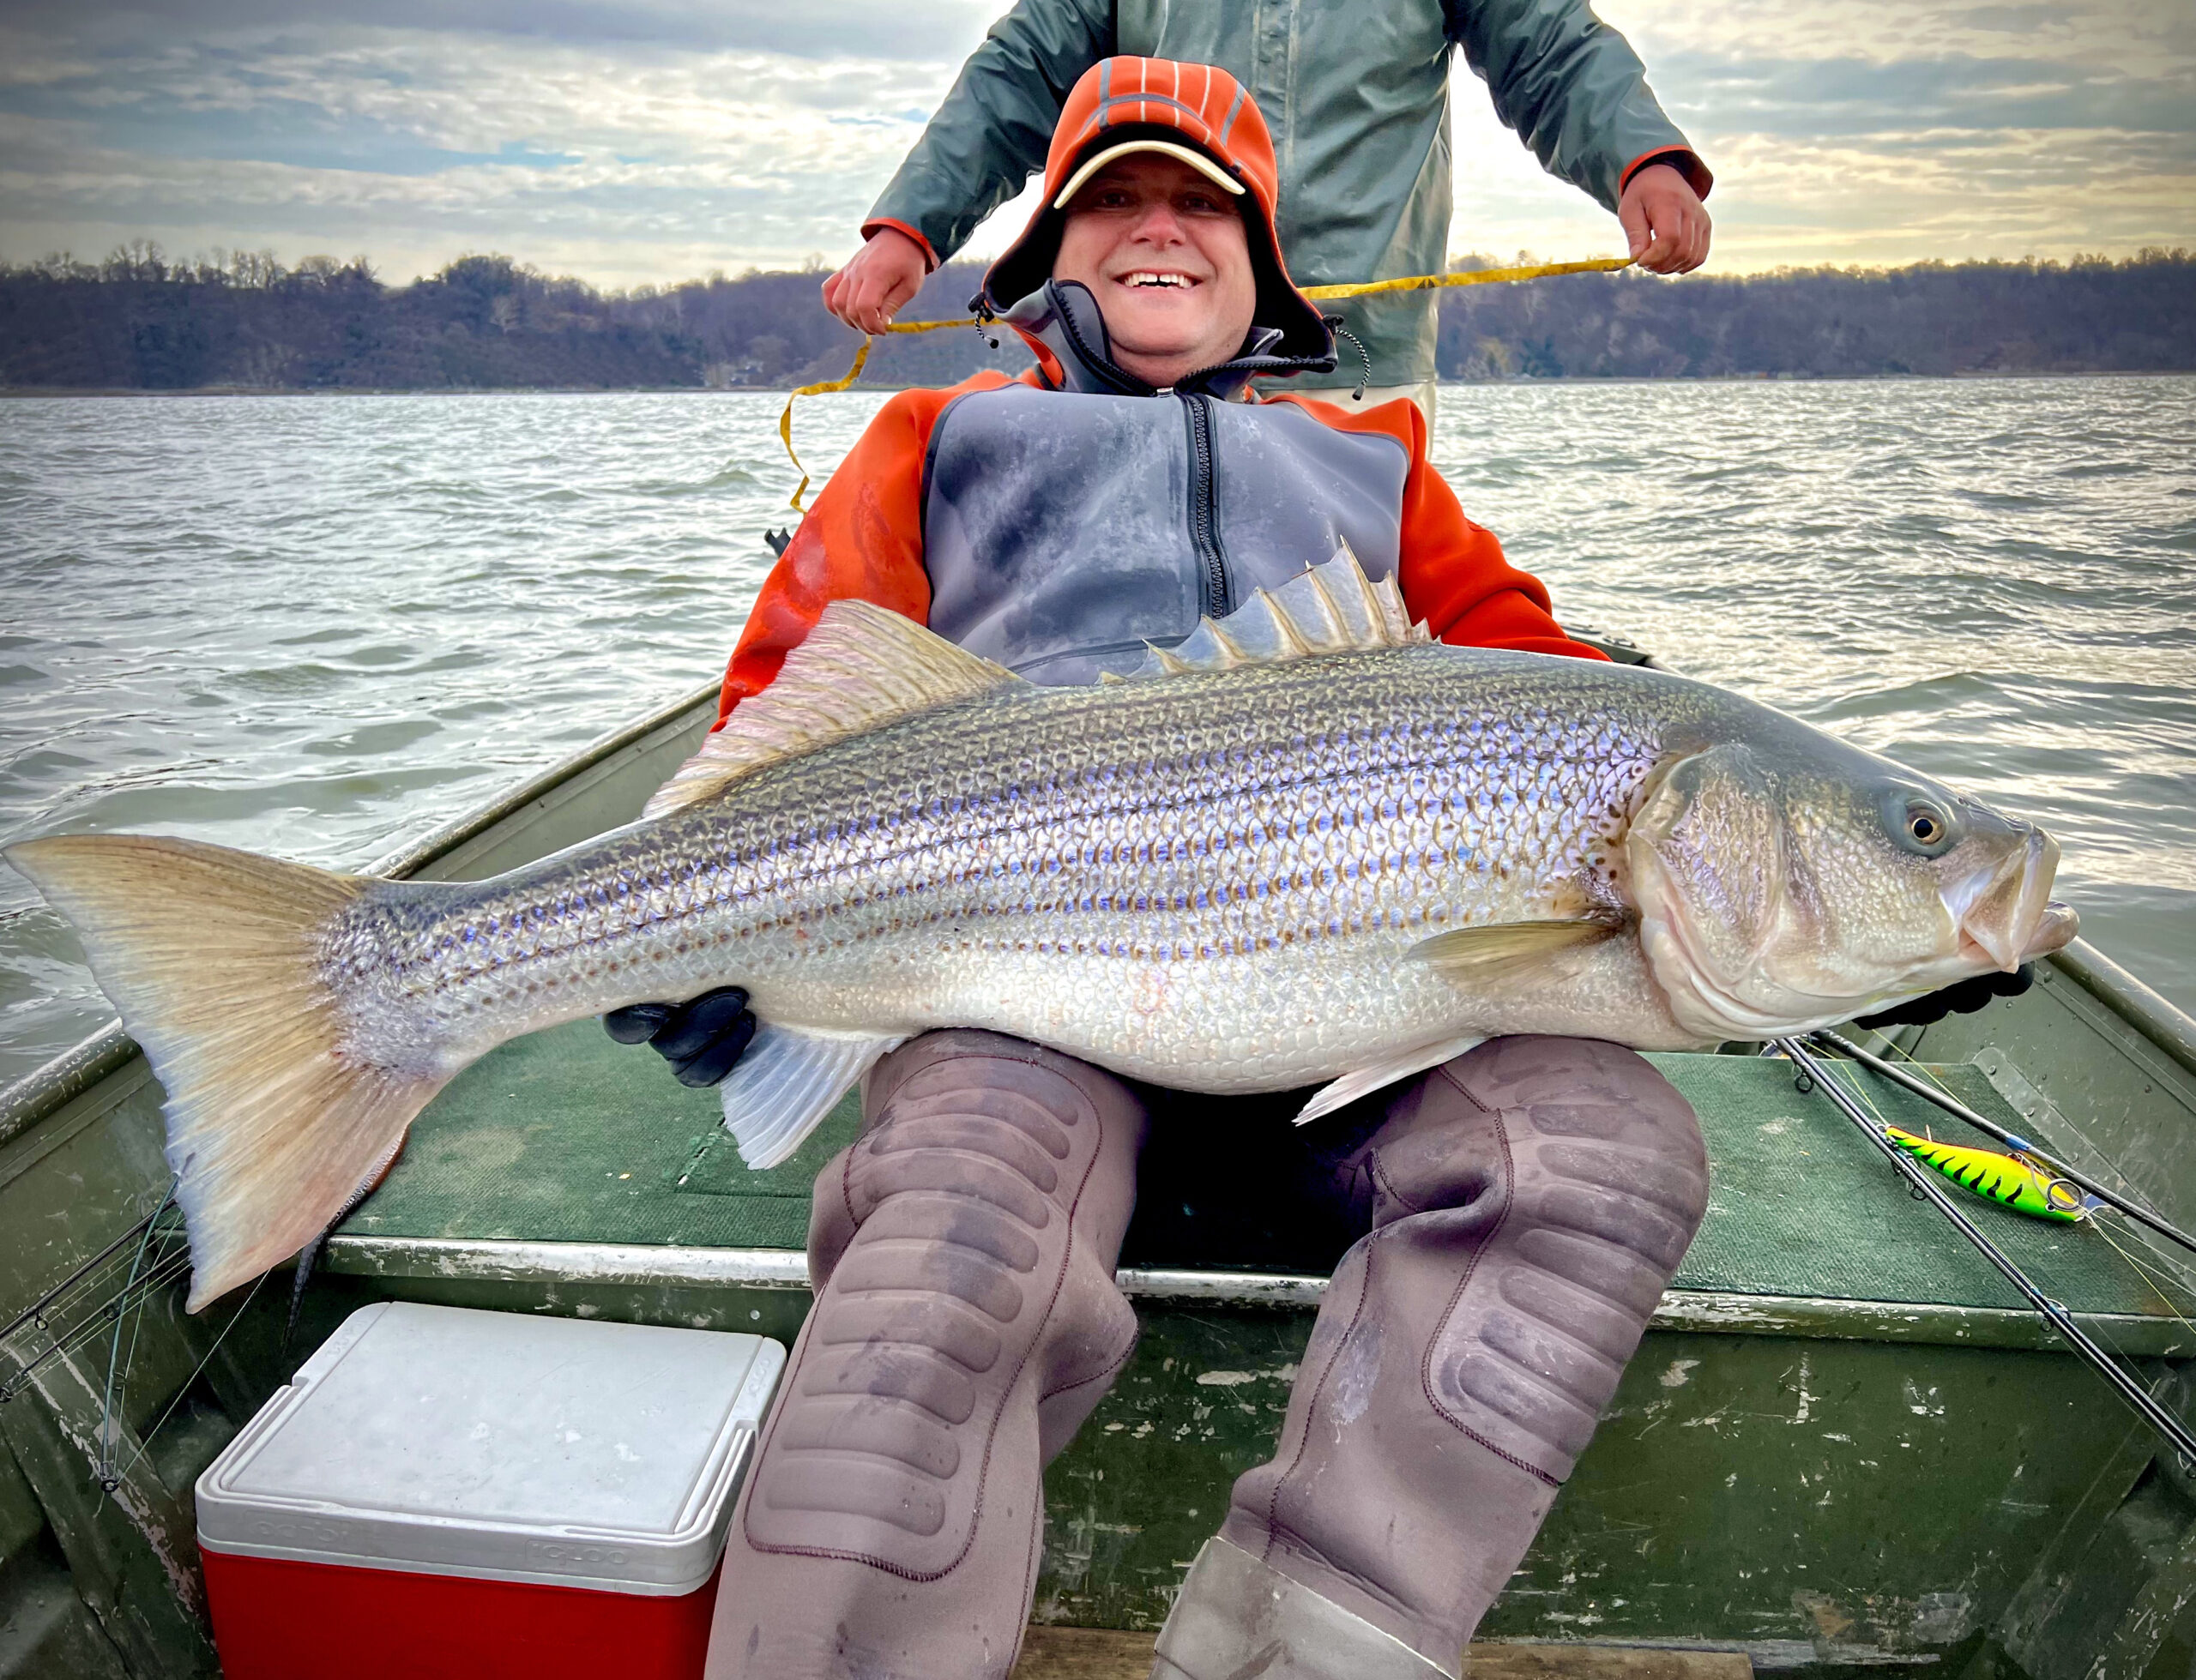 Near-Record Striped Bass Caught in Maryland